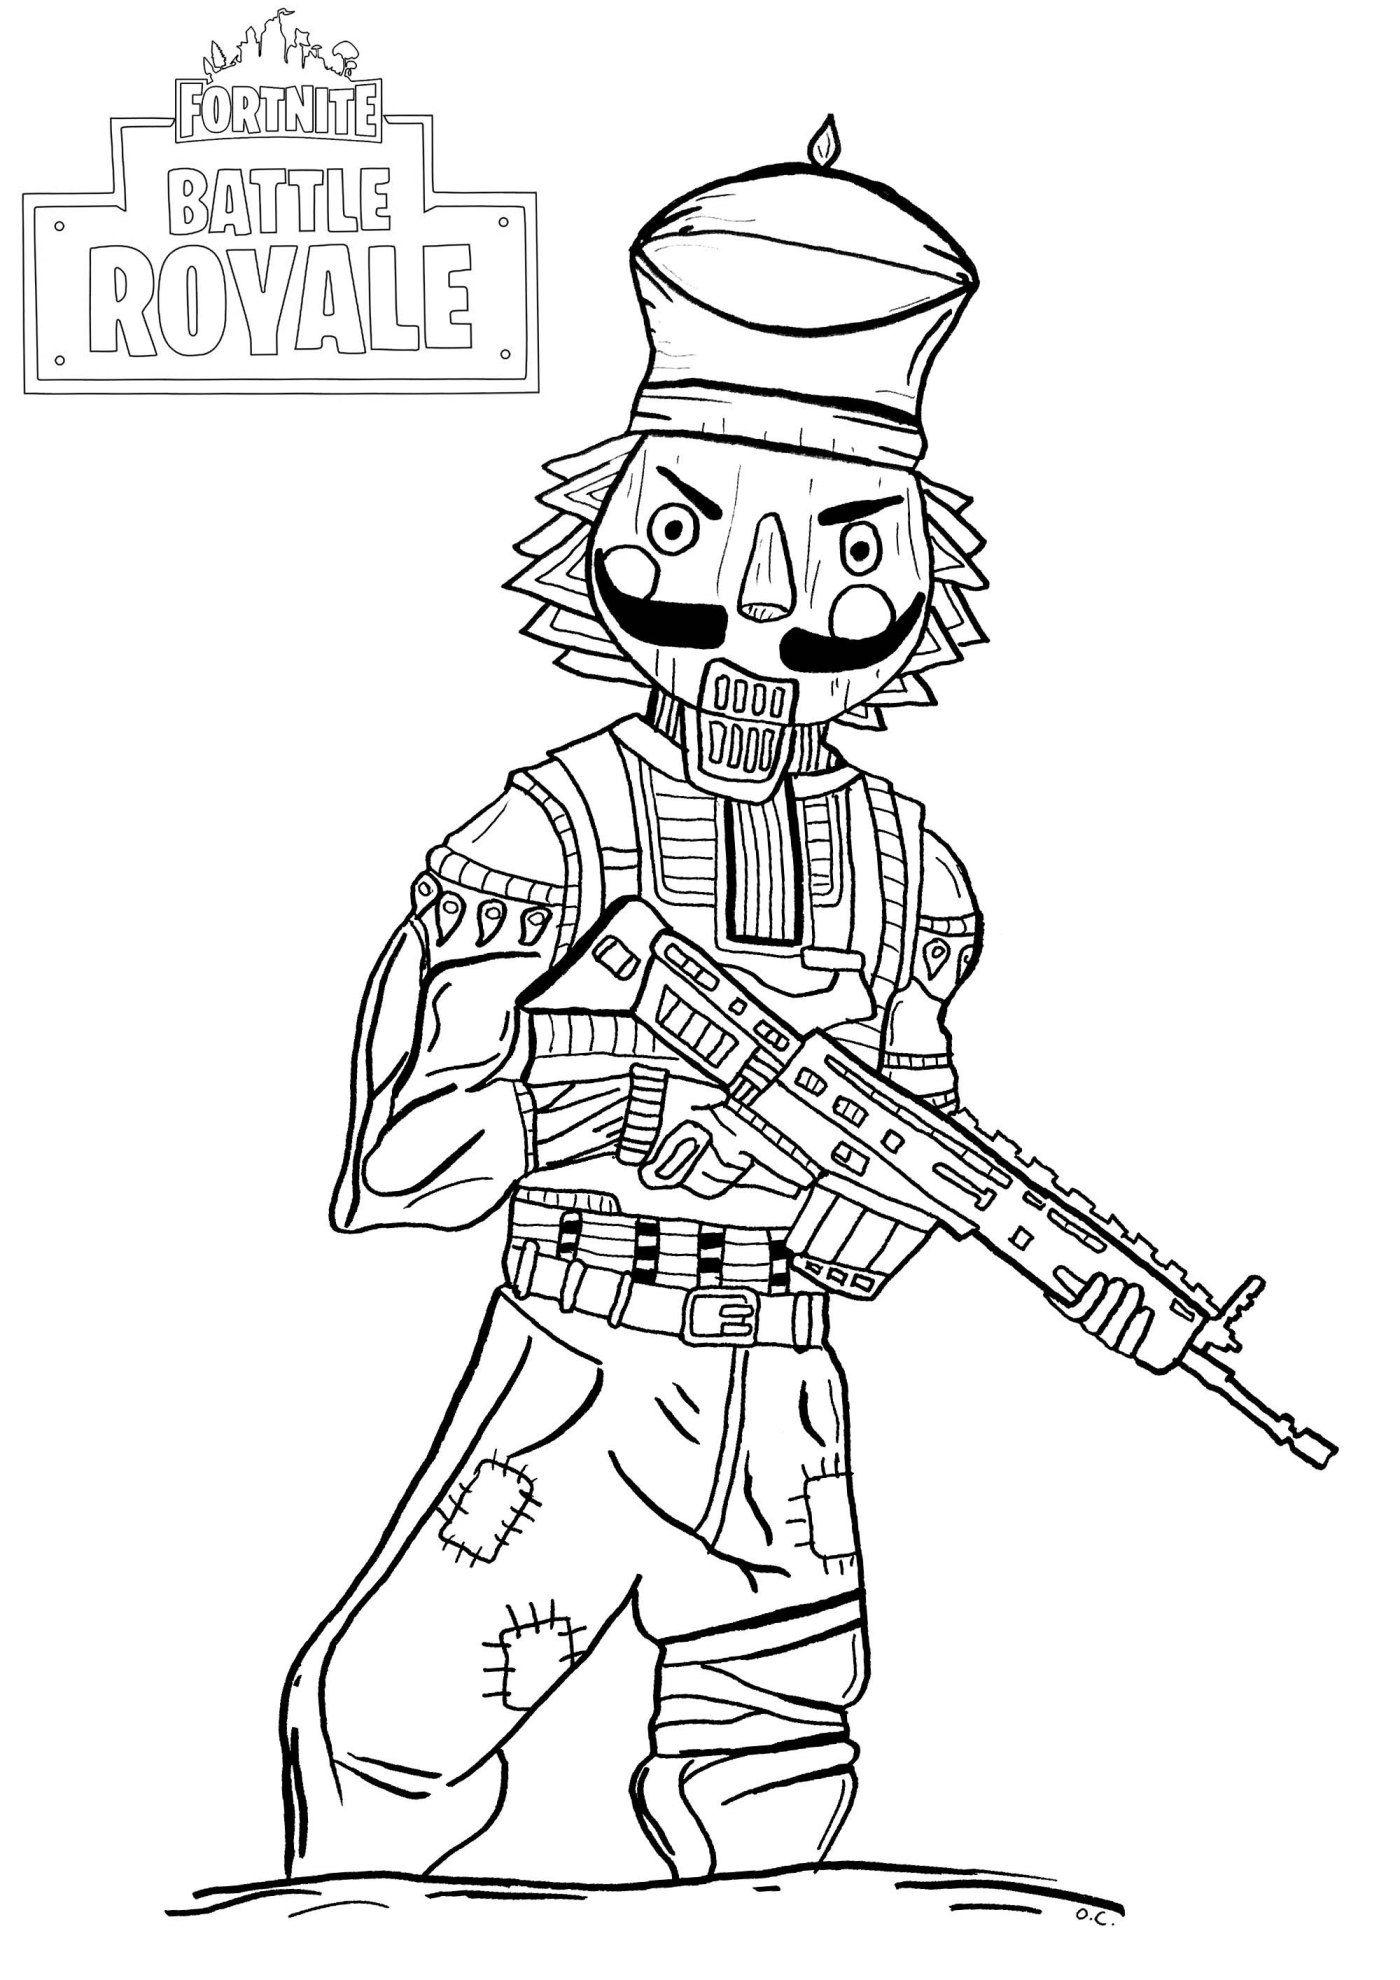 Coloring Fortnite Battle Royale Logo - These Fortnite Coloring Pages are the Perfect Gift for Anyone ...